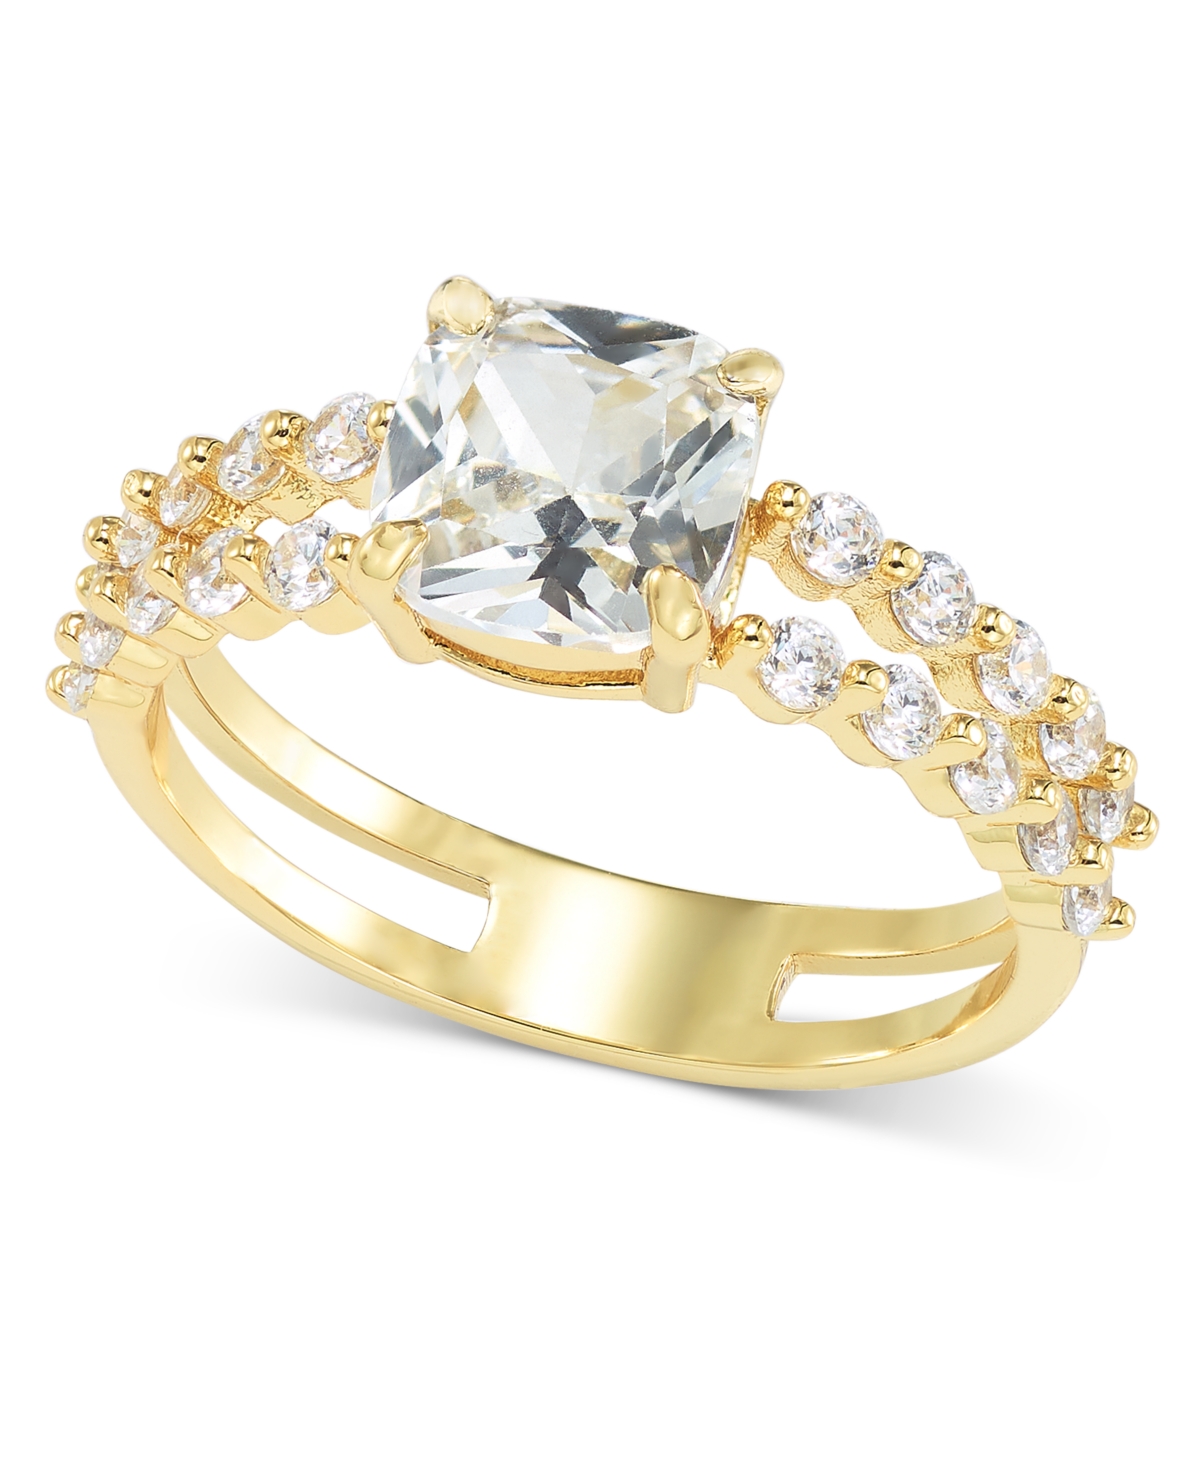 Gold-Tone Cubic Zirconia Double Band Ring, Created for Macy's - Gold